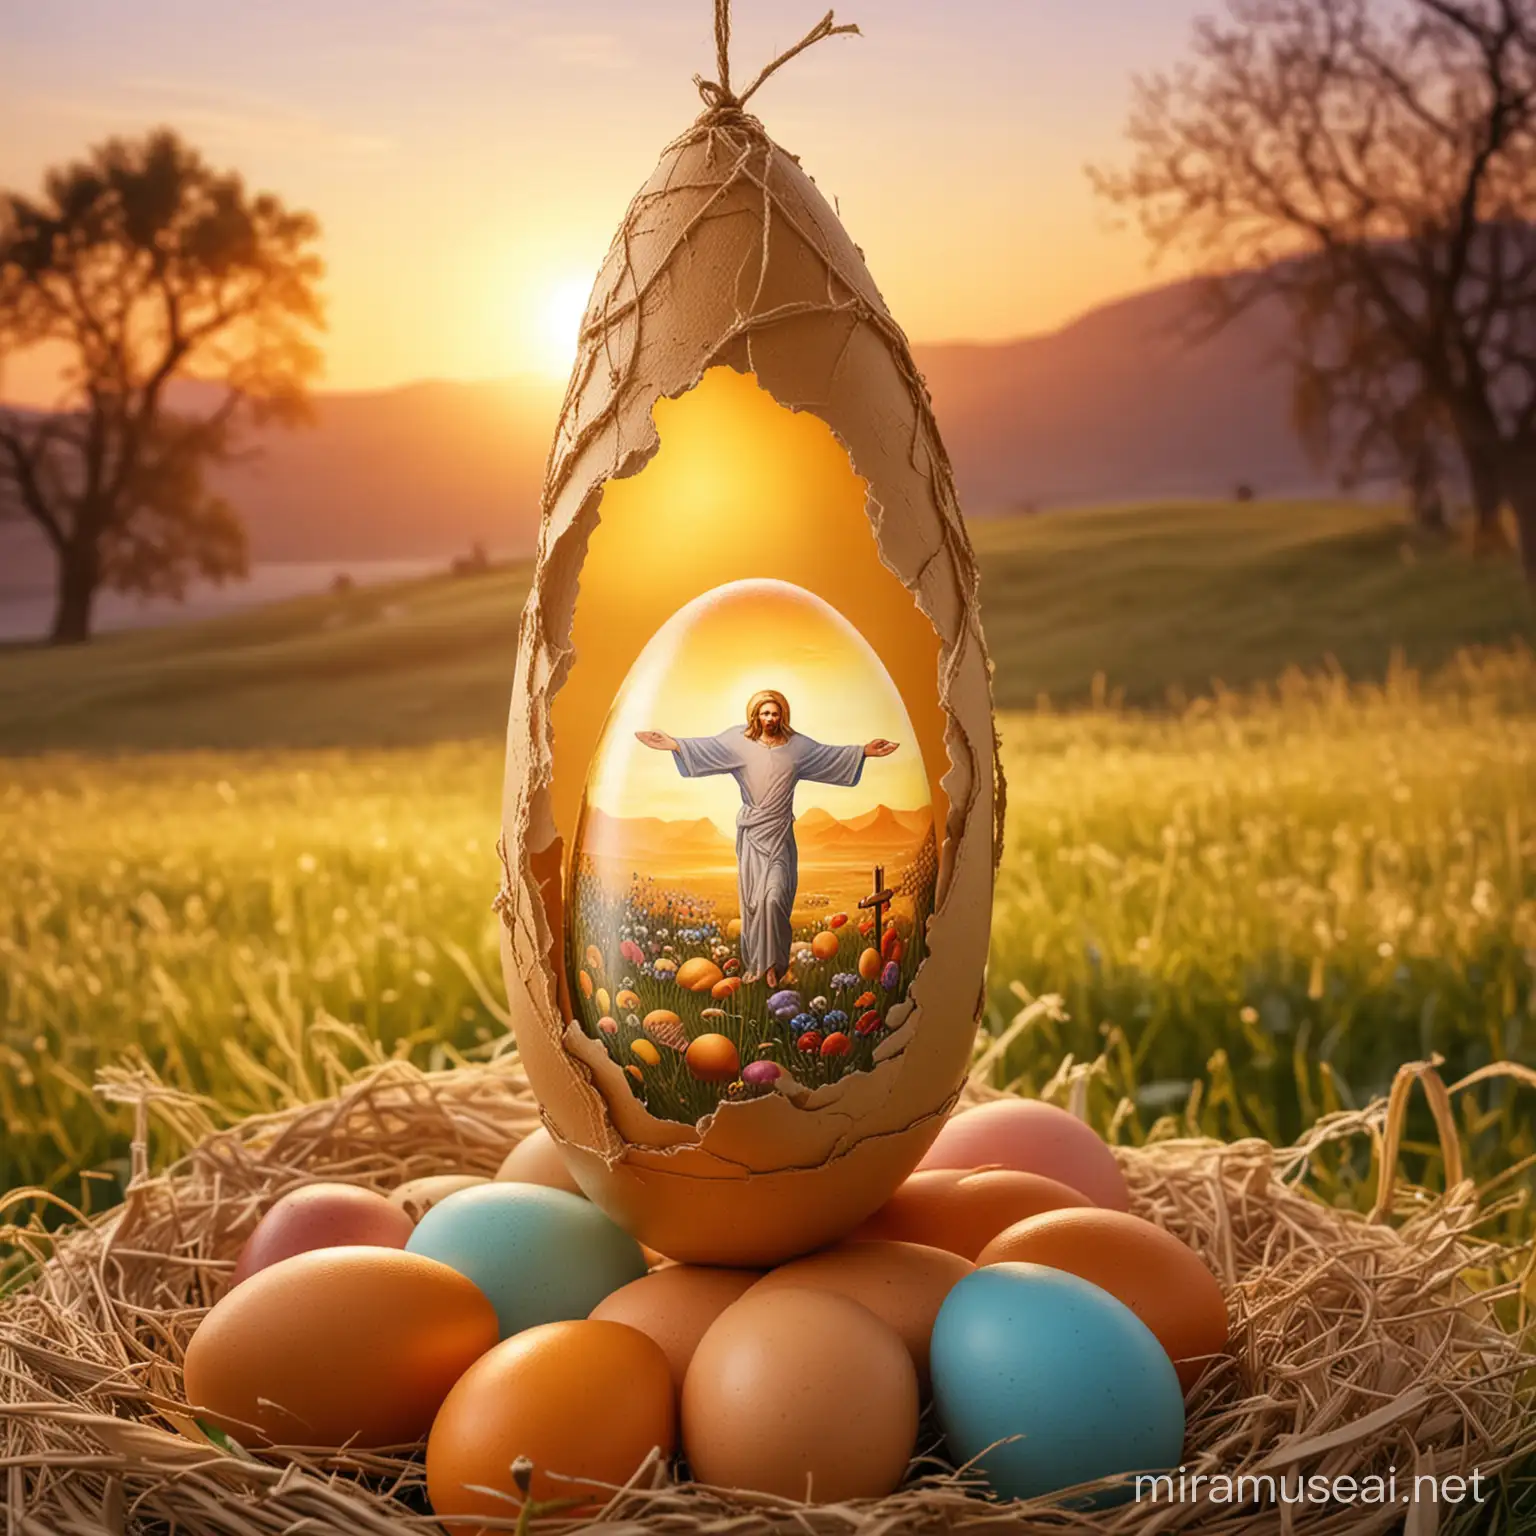 Eastern egg is on spring meadow covered with various colored eggs. There is picture of hanged Jesus on surface of eastern egg. Backround is on golden sunset atmosphere .